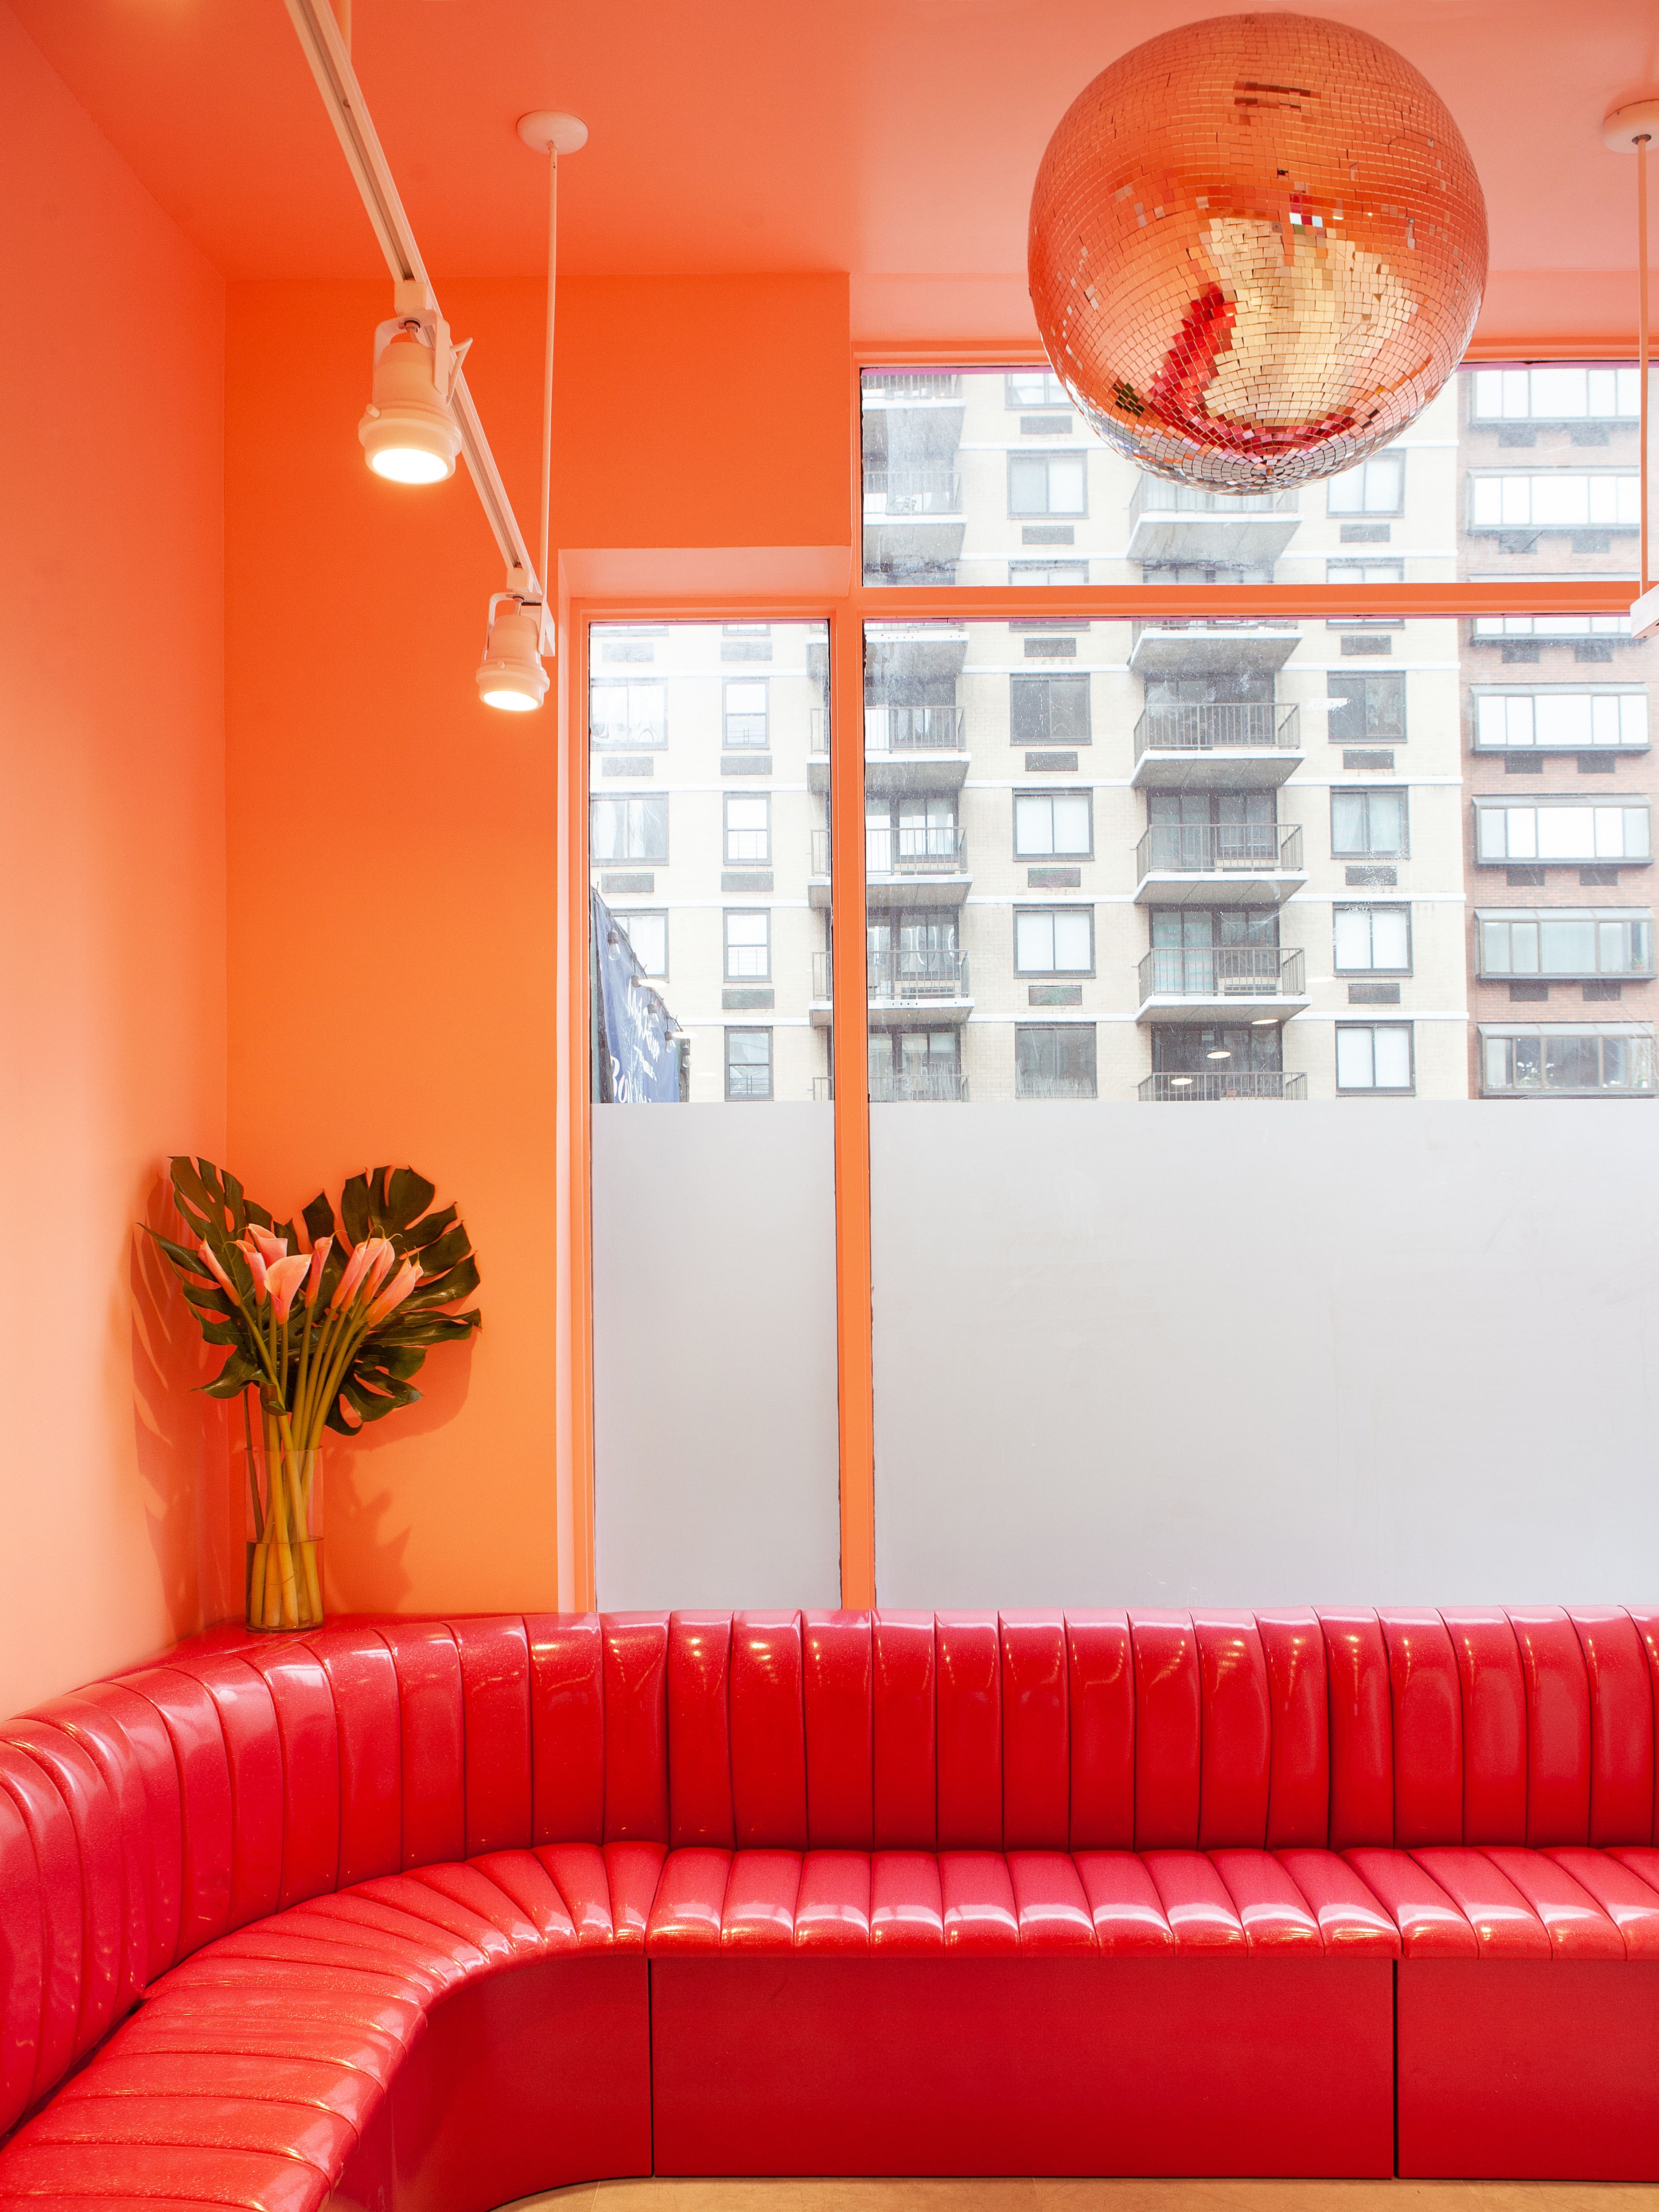 Tour a Funky Fitness Studio Inspired by the ’80s